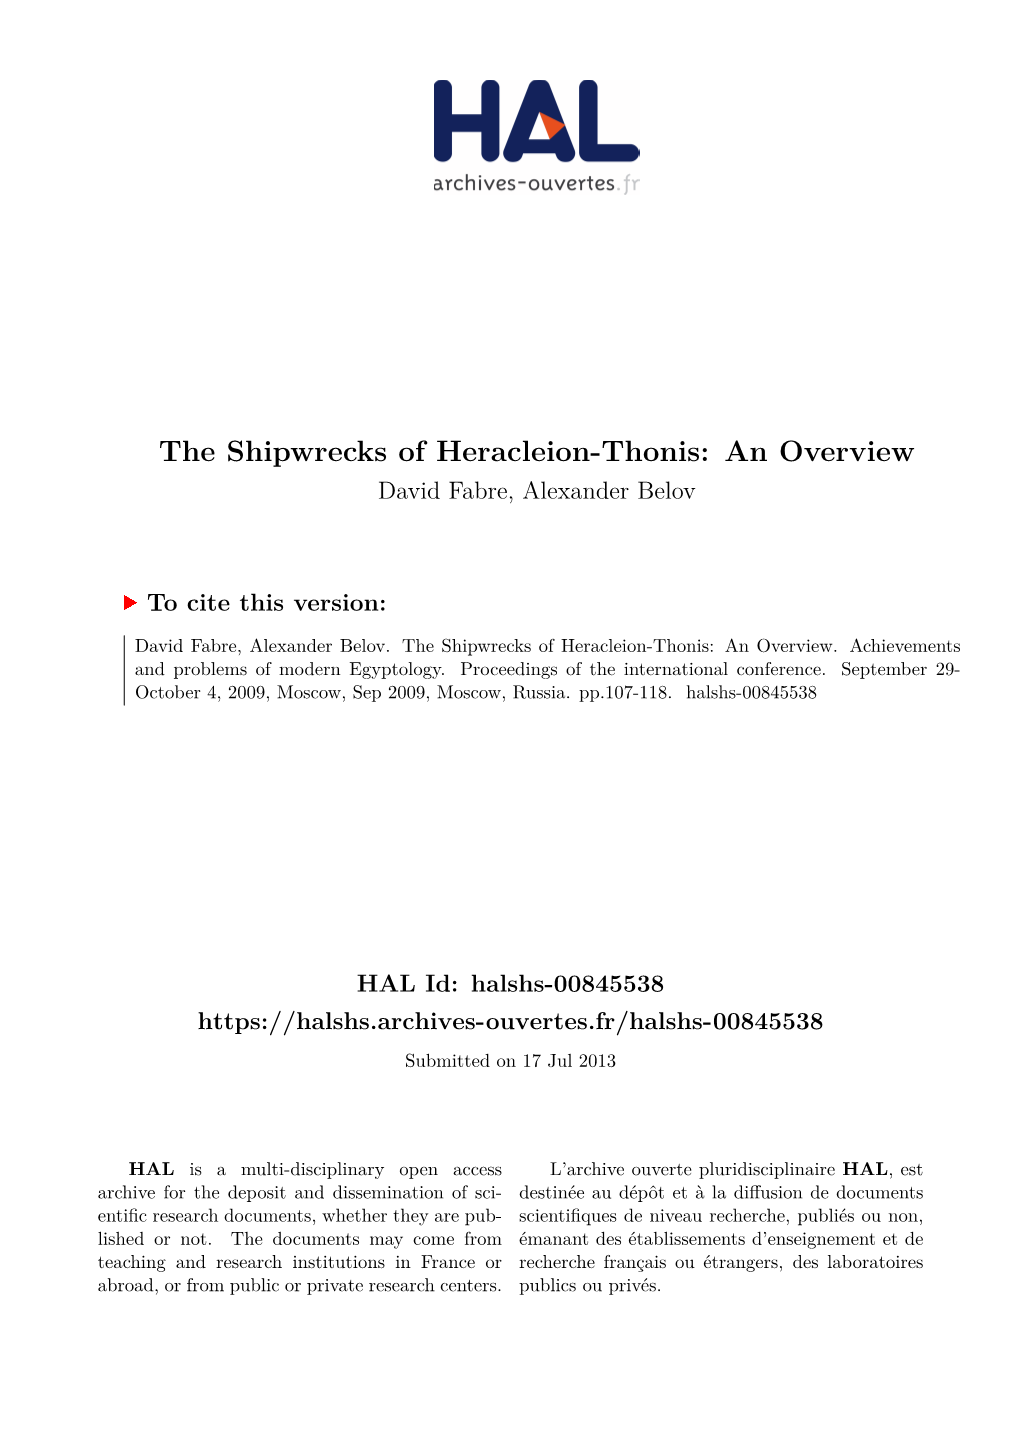 The Shipwrecks of Heracleion-Thonis: an Overview David Fabre, Alexander Belov